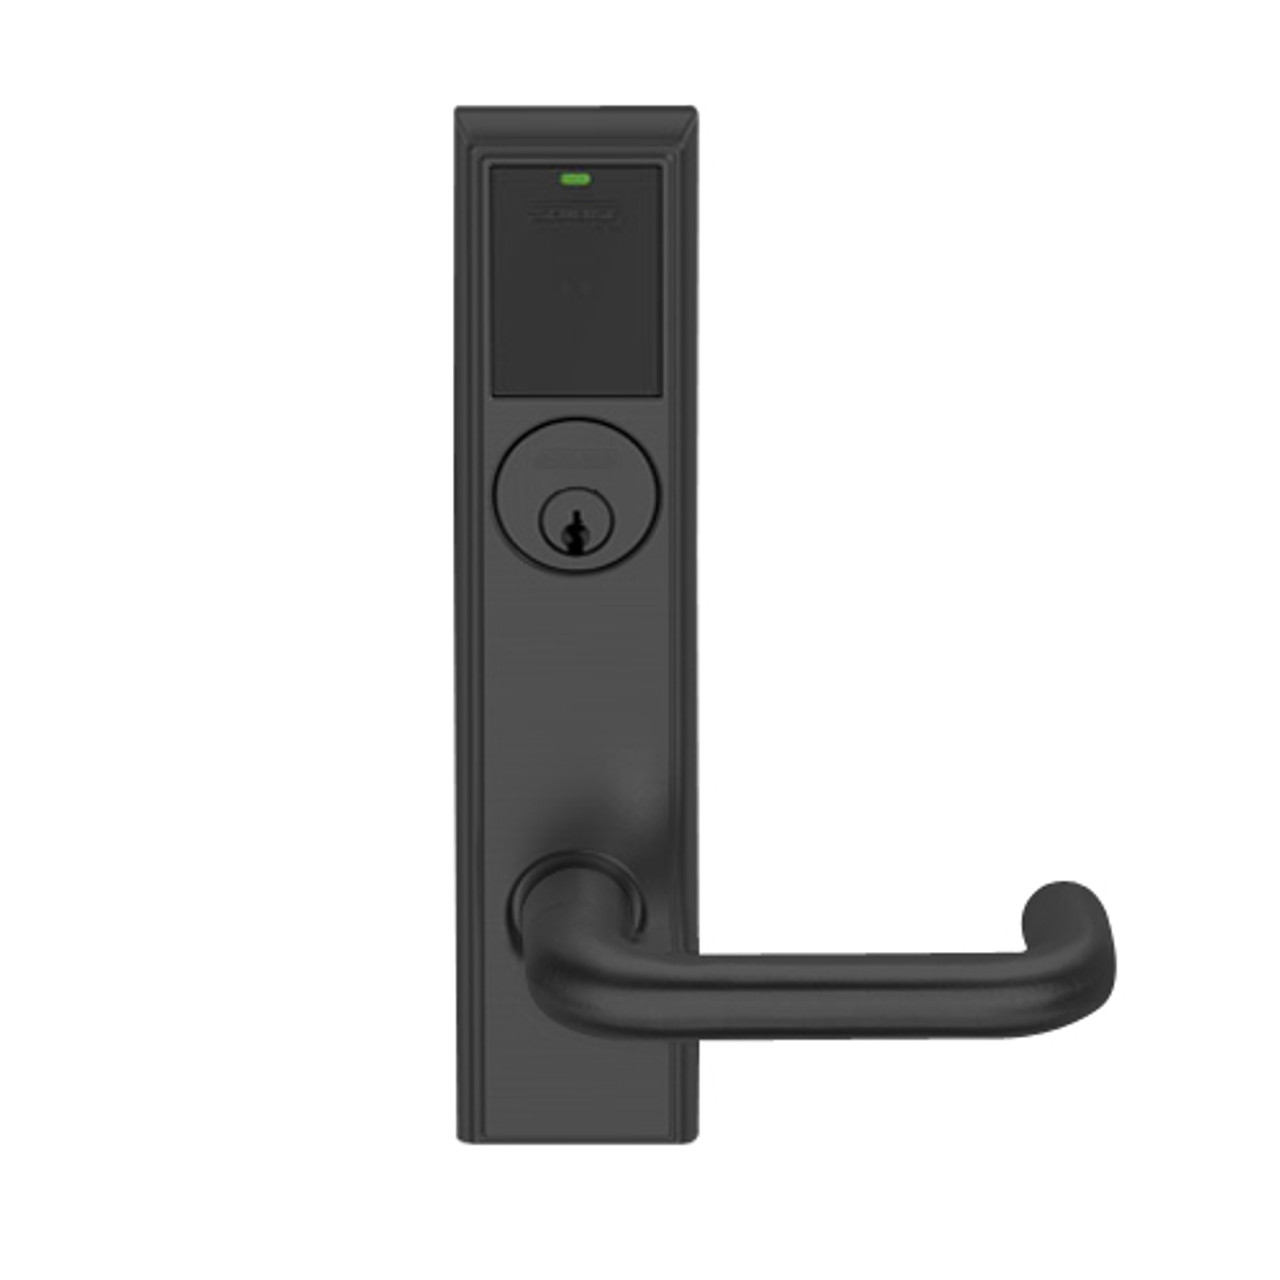 LEMD-ADD-P-03-622 Schlage Privacy/Apartment Wireless Addison Mortise Deadbolt Lock with LED and Tubular Lever in Matte Black